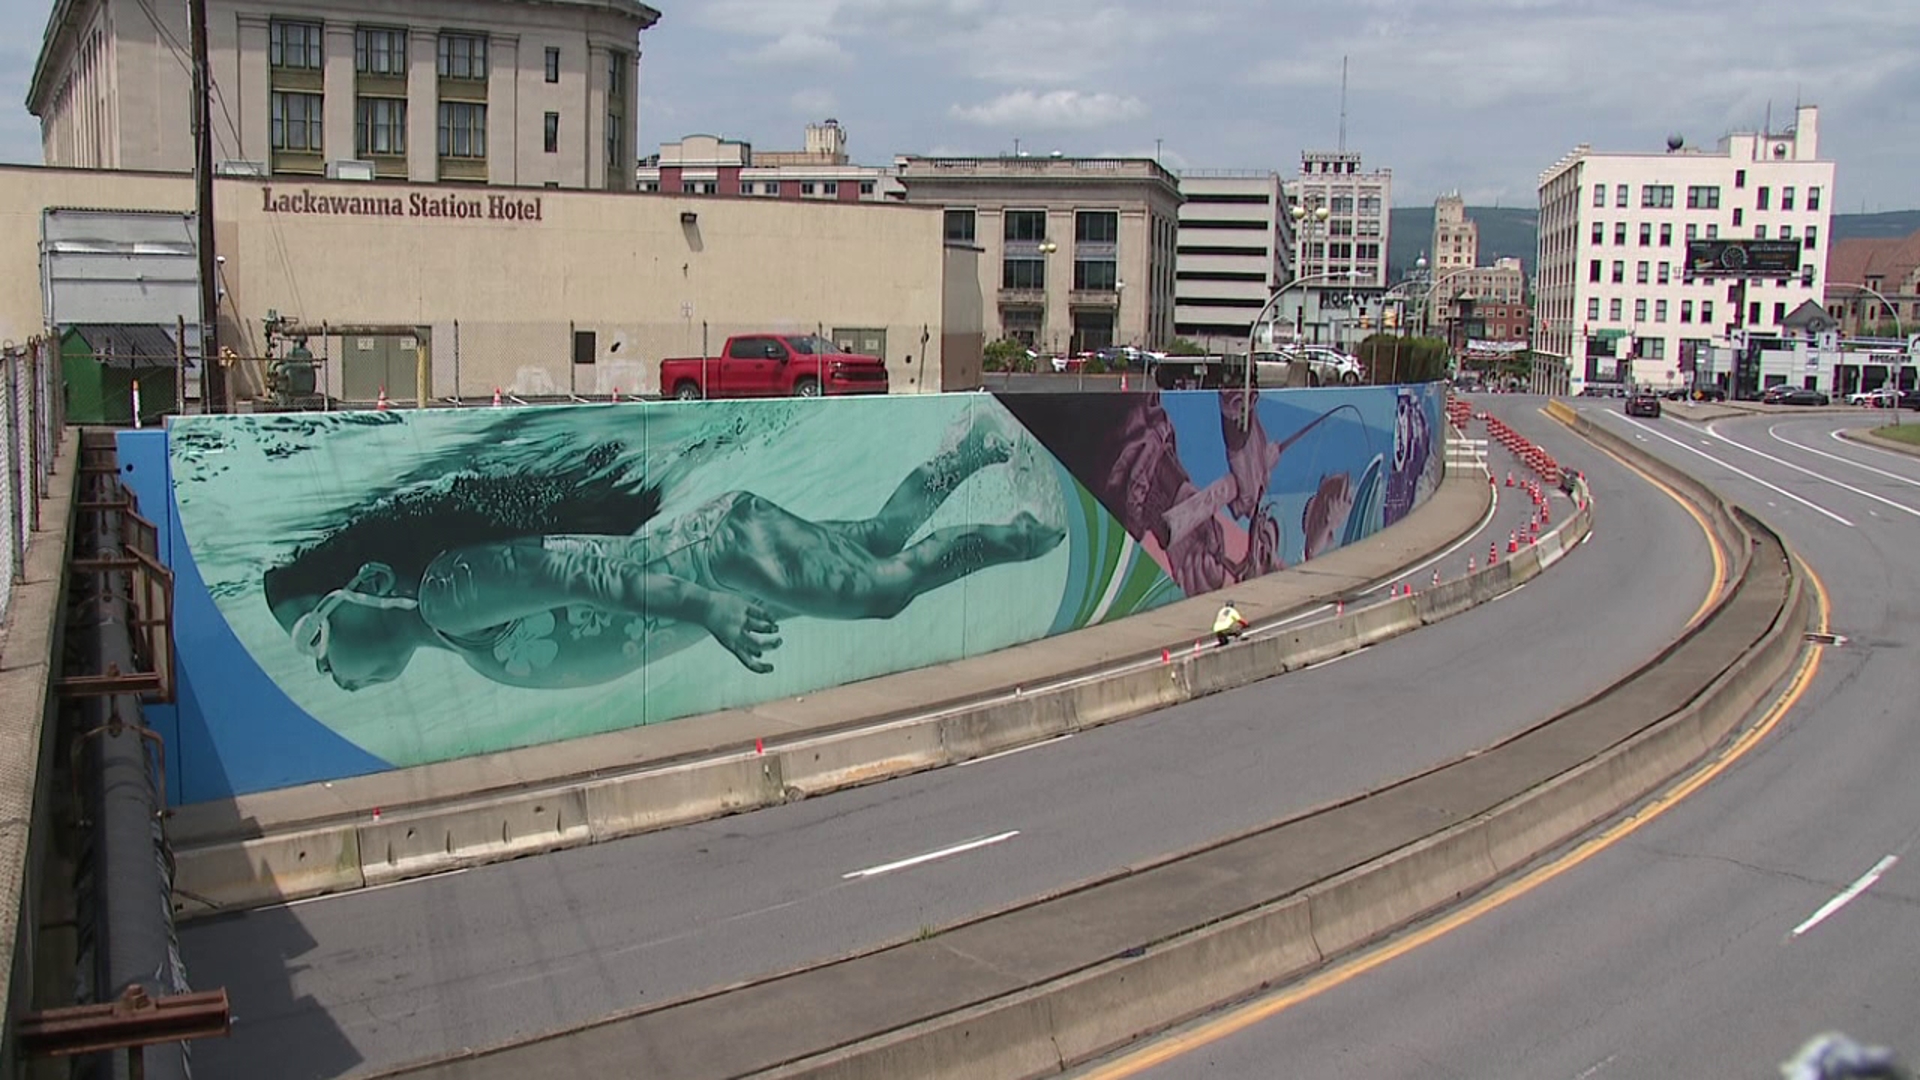 One lane of the Biden Expressway in Scranton is shut down as crews work on a mural project.